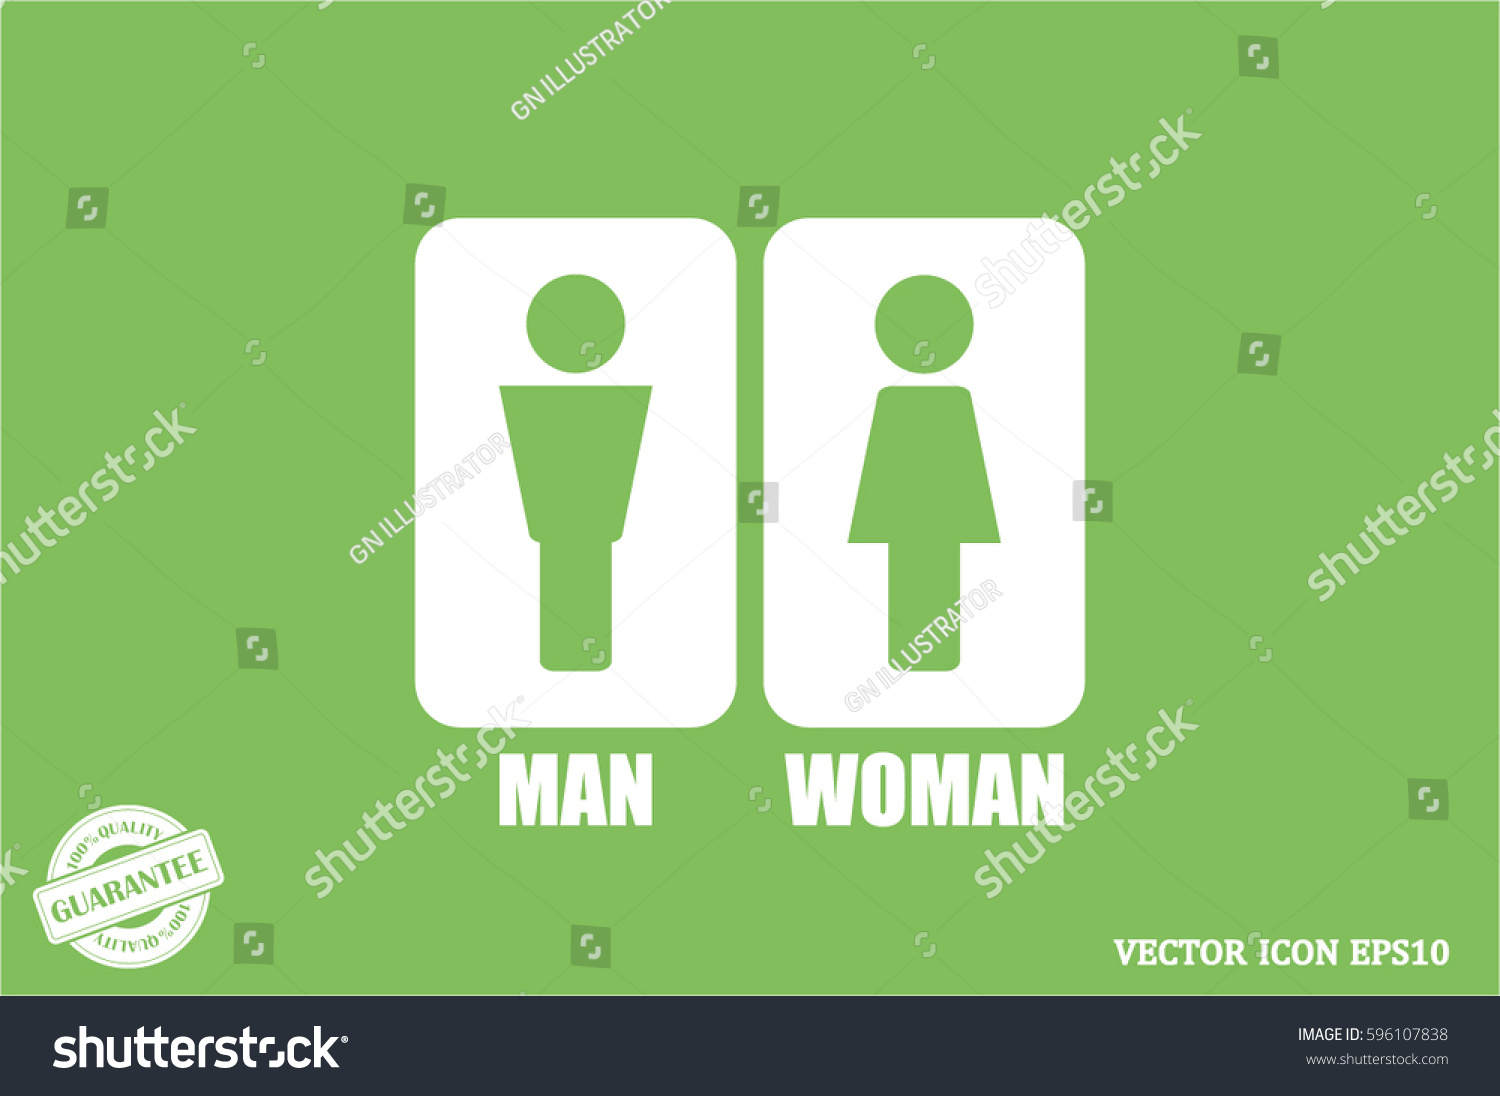 Man and Woman Icon Vector #596107838